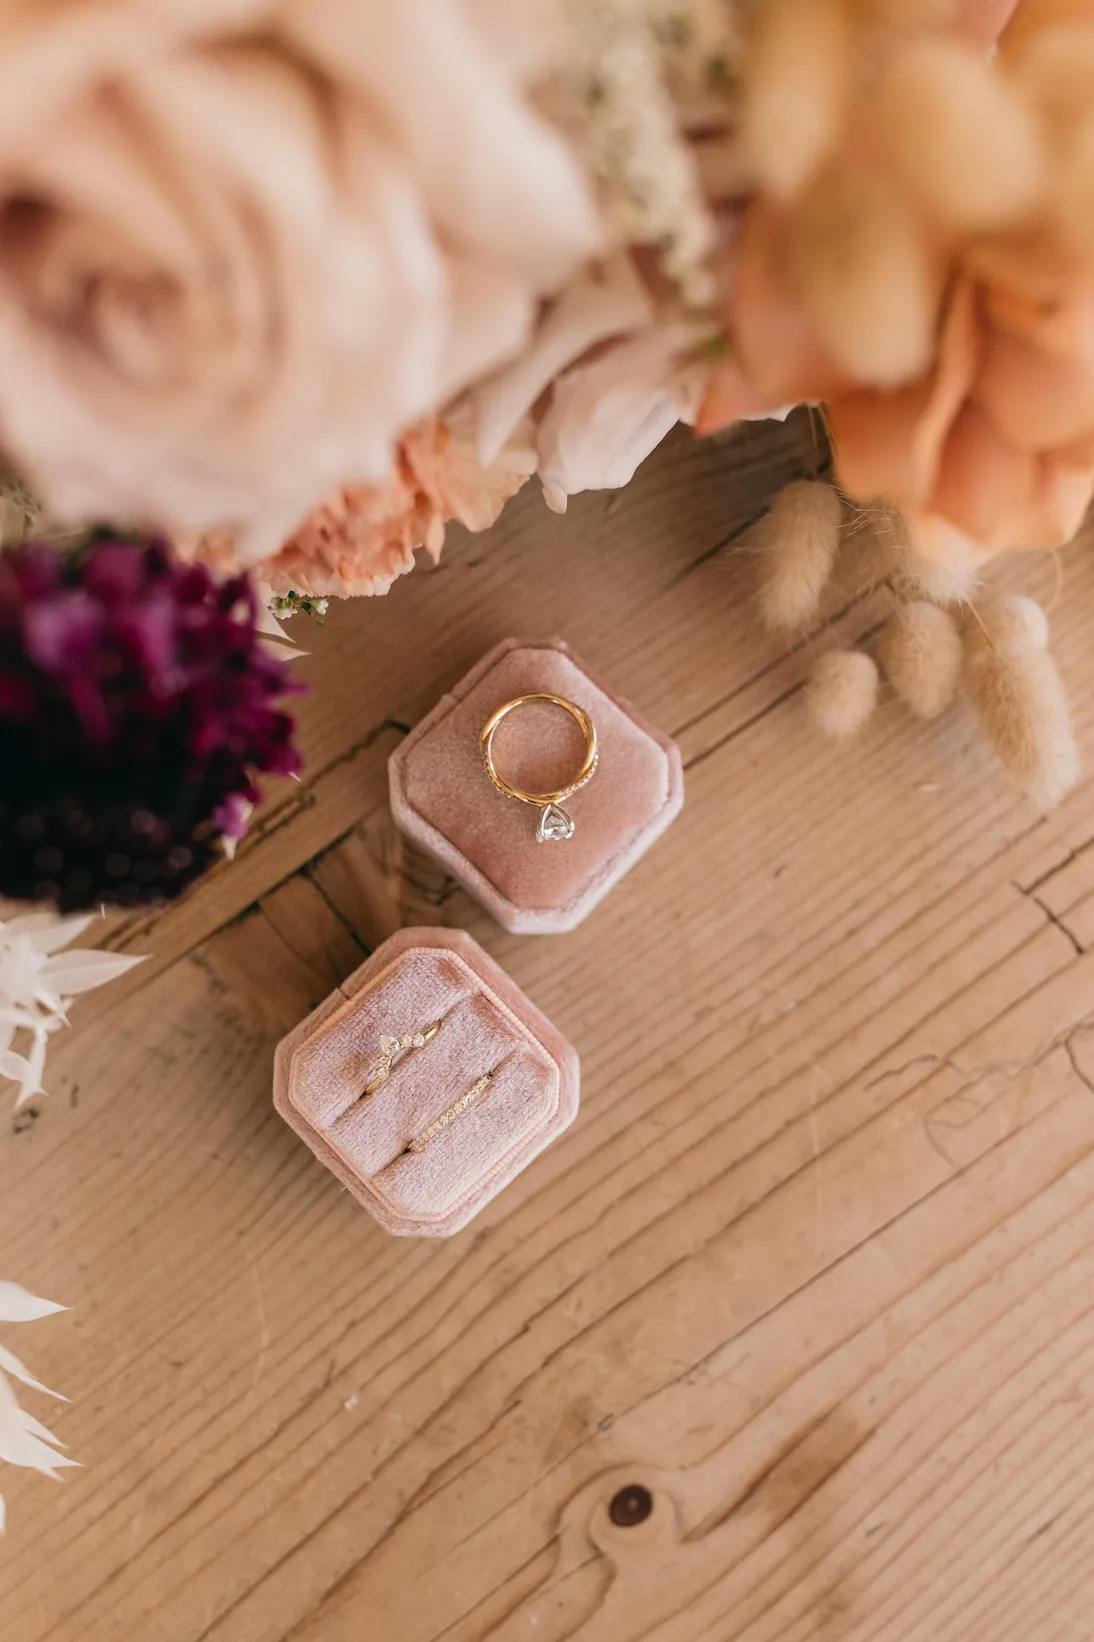 A pink velvet ring box with an open lid displaying a gold ring with a small diamond rests on a wooden table surrounded by various flowers in soft hues. A second, closed, matching pink velvet ring box is set beside it.